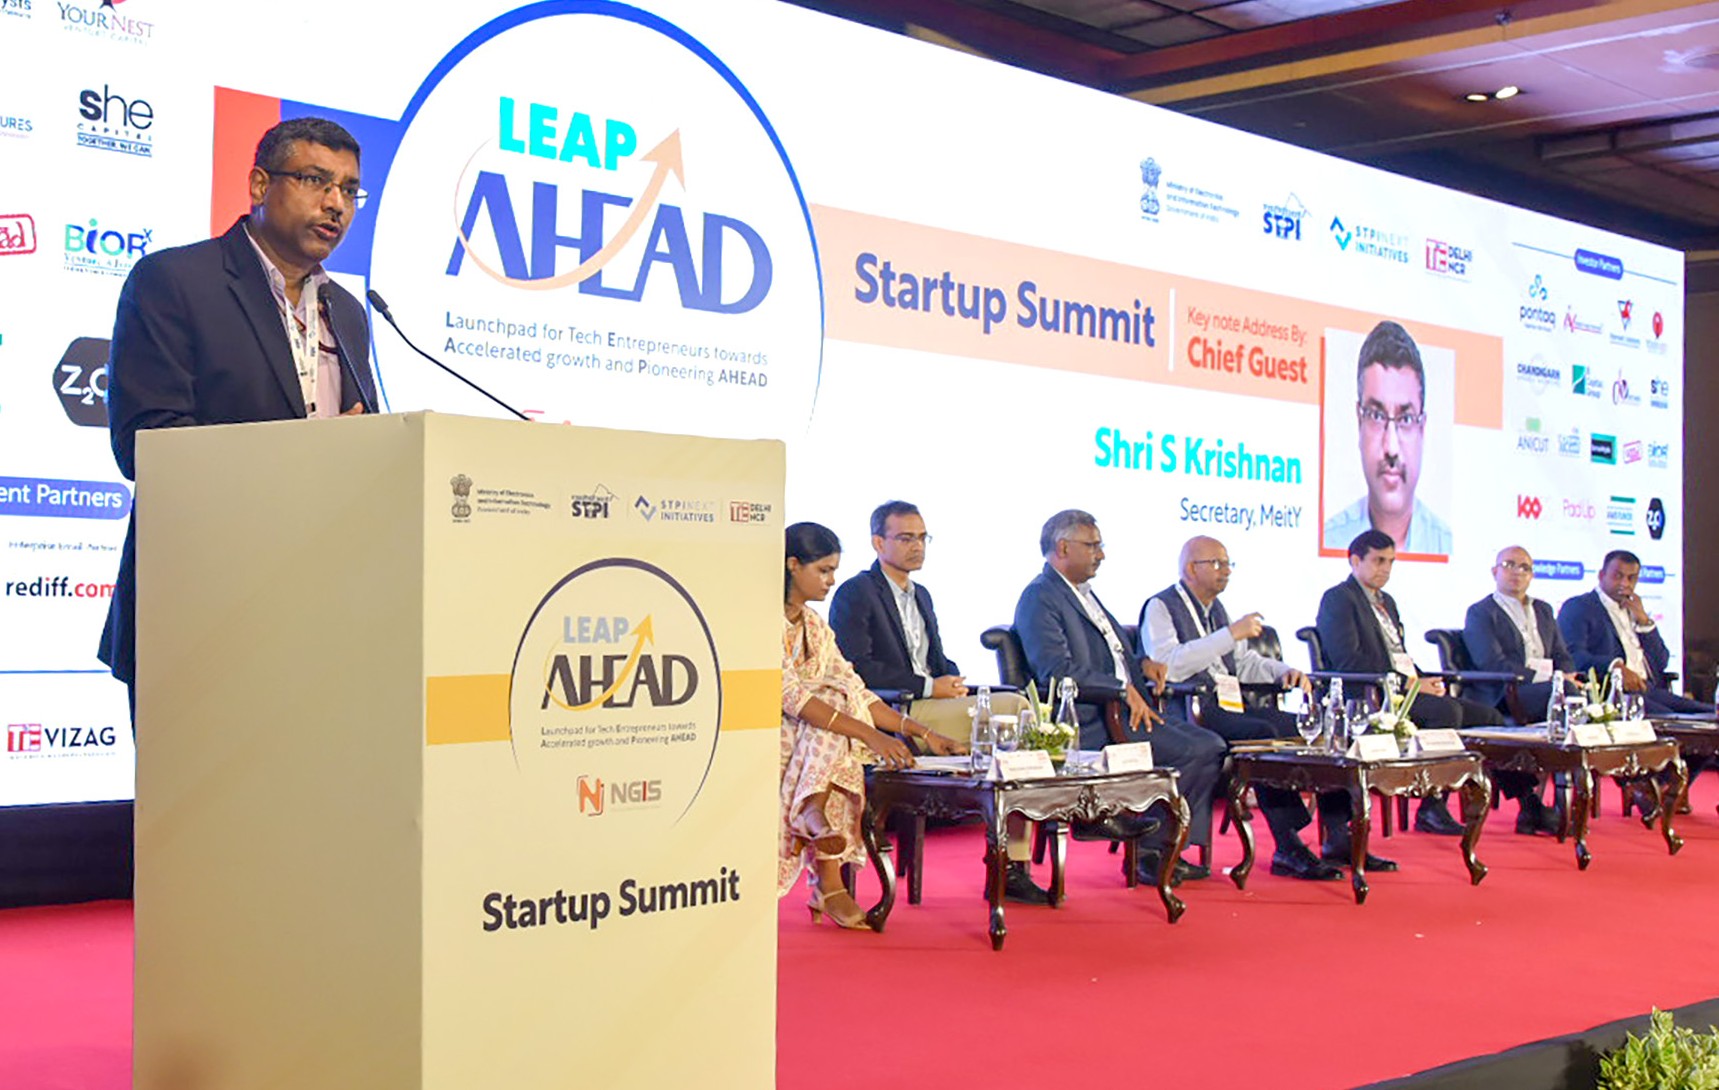 STPI launches LEAP AHEAD initiative for startups to get access to investment, mentorship & global connect